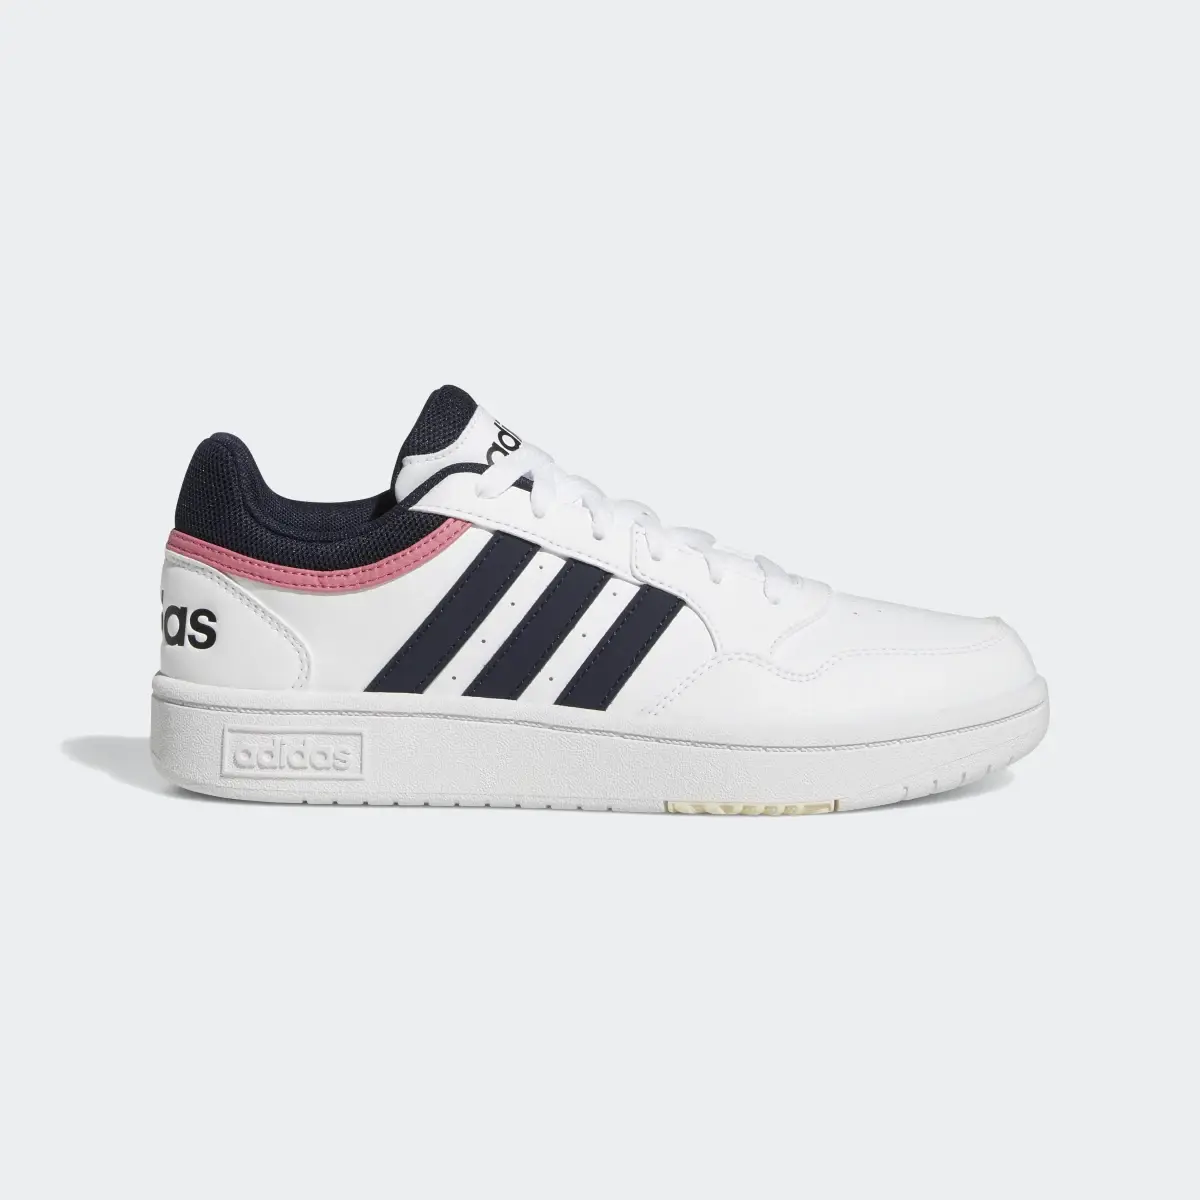 Adidas Hoops 3.0 Low Classic Shoes. 2